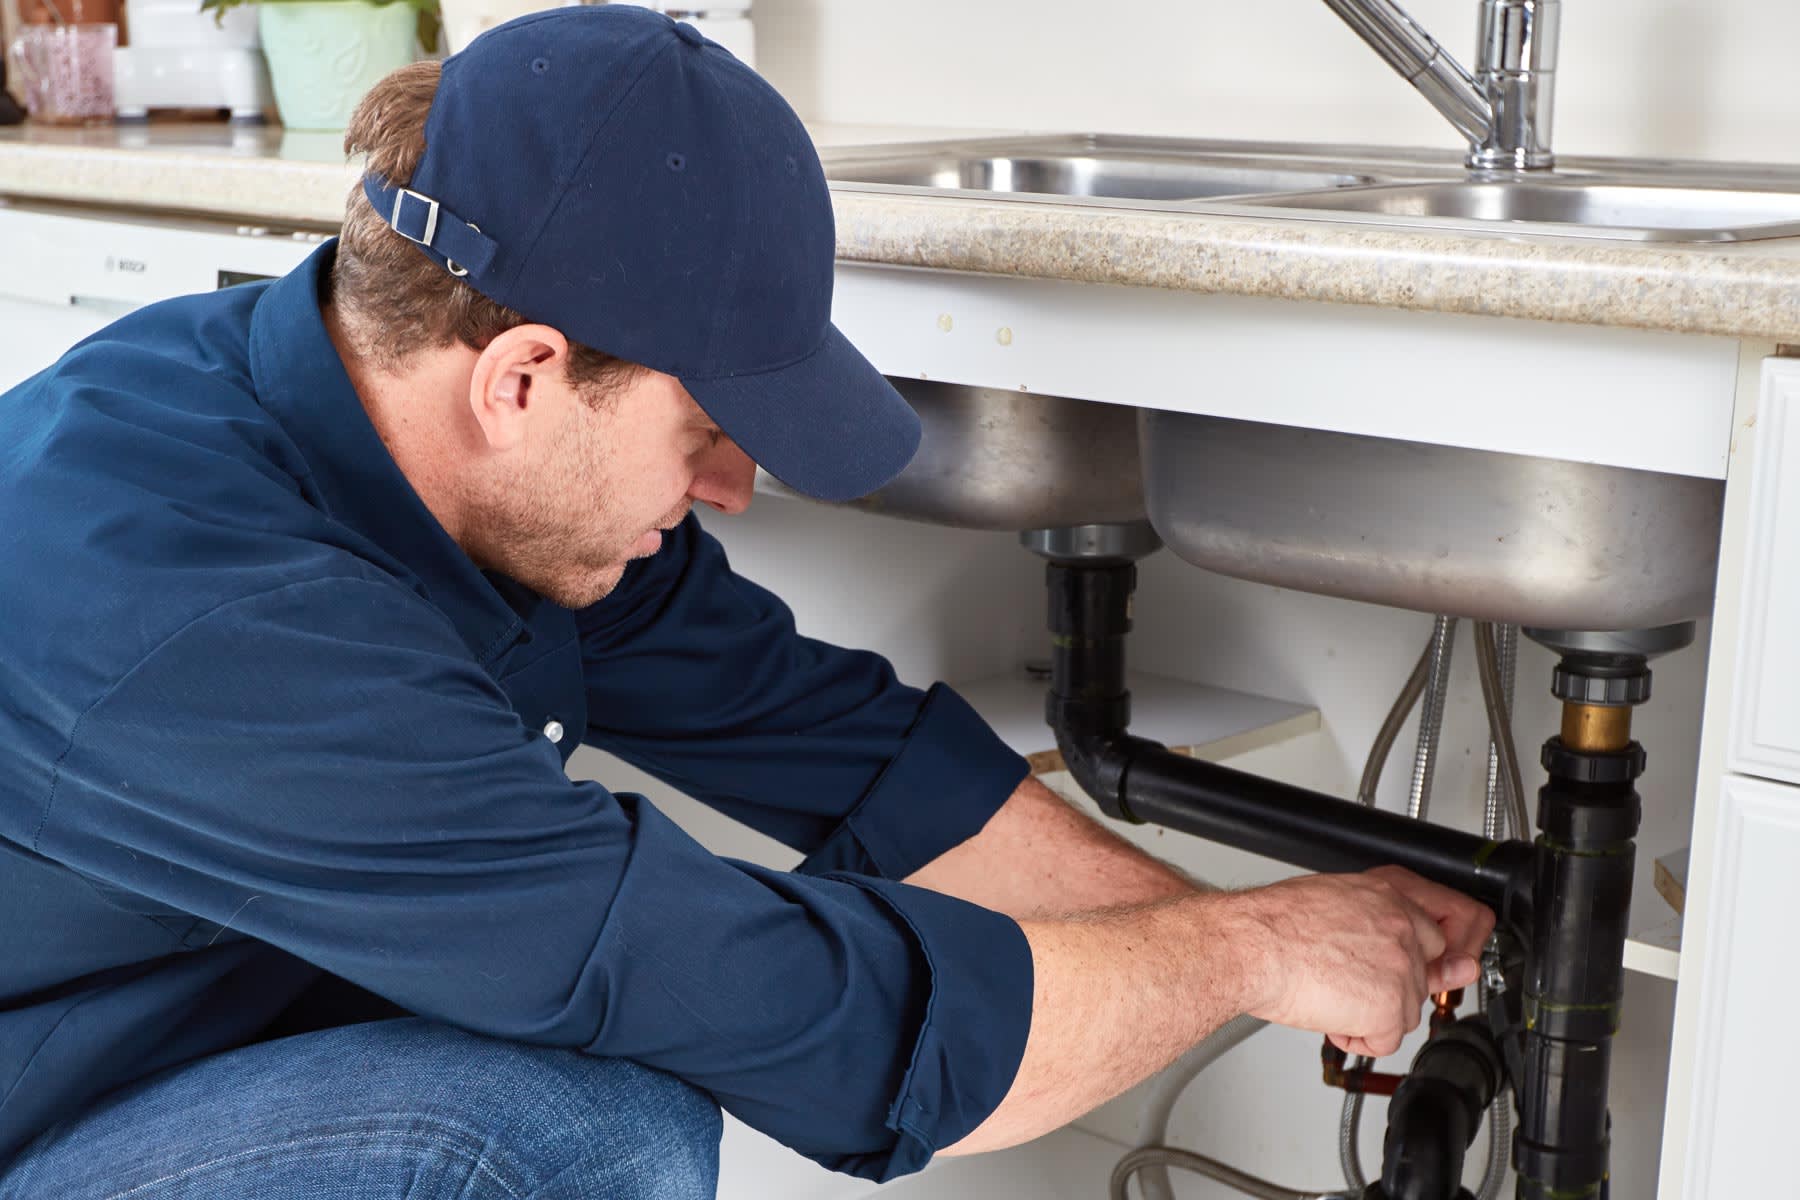 Find a plumber near you